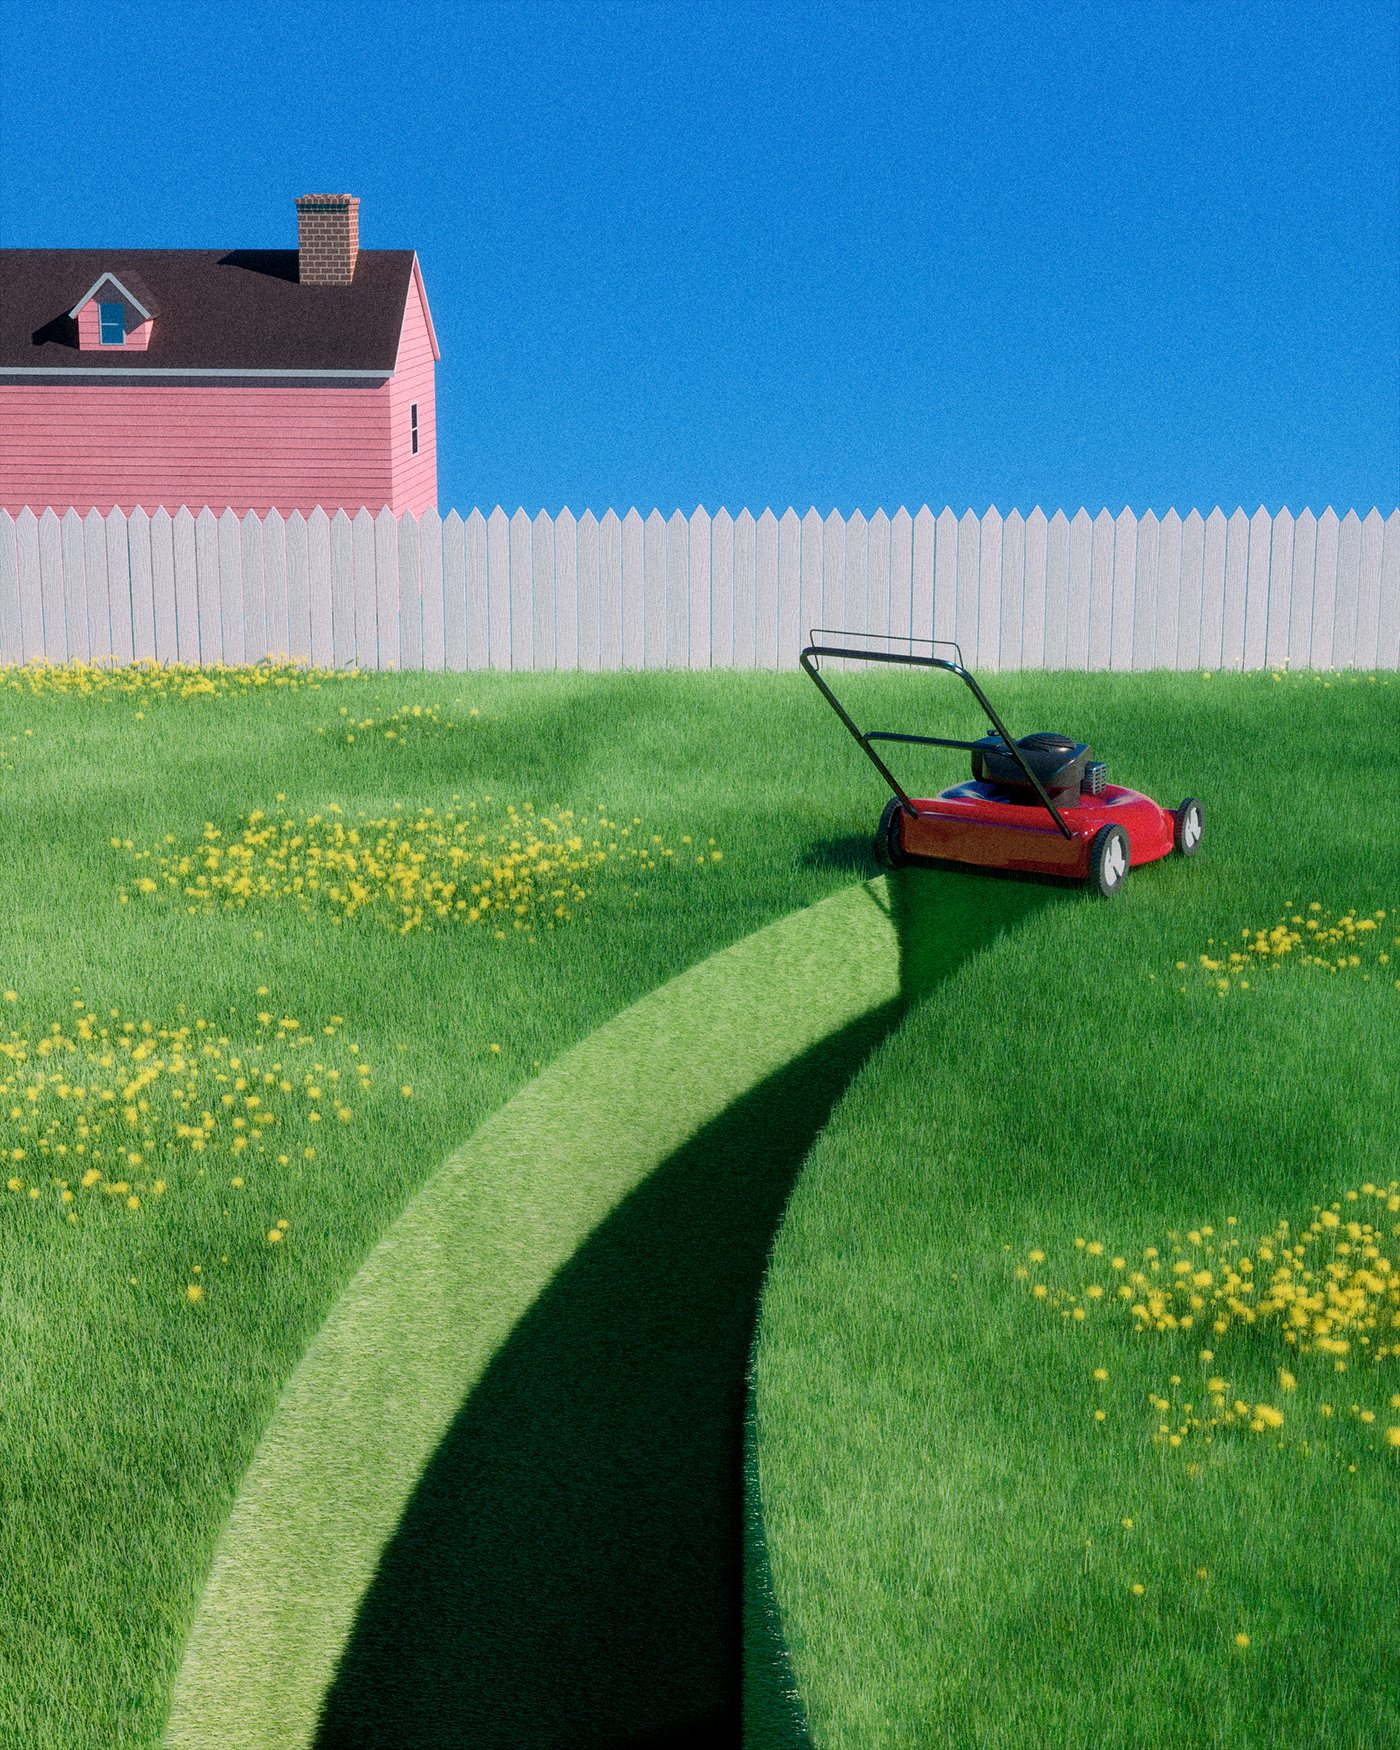  Mowing the lawn 